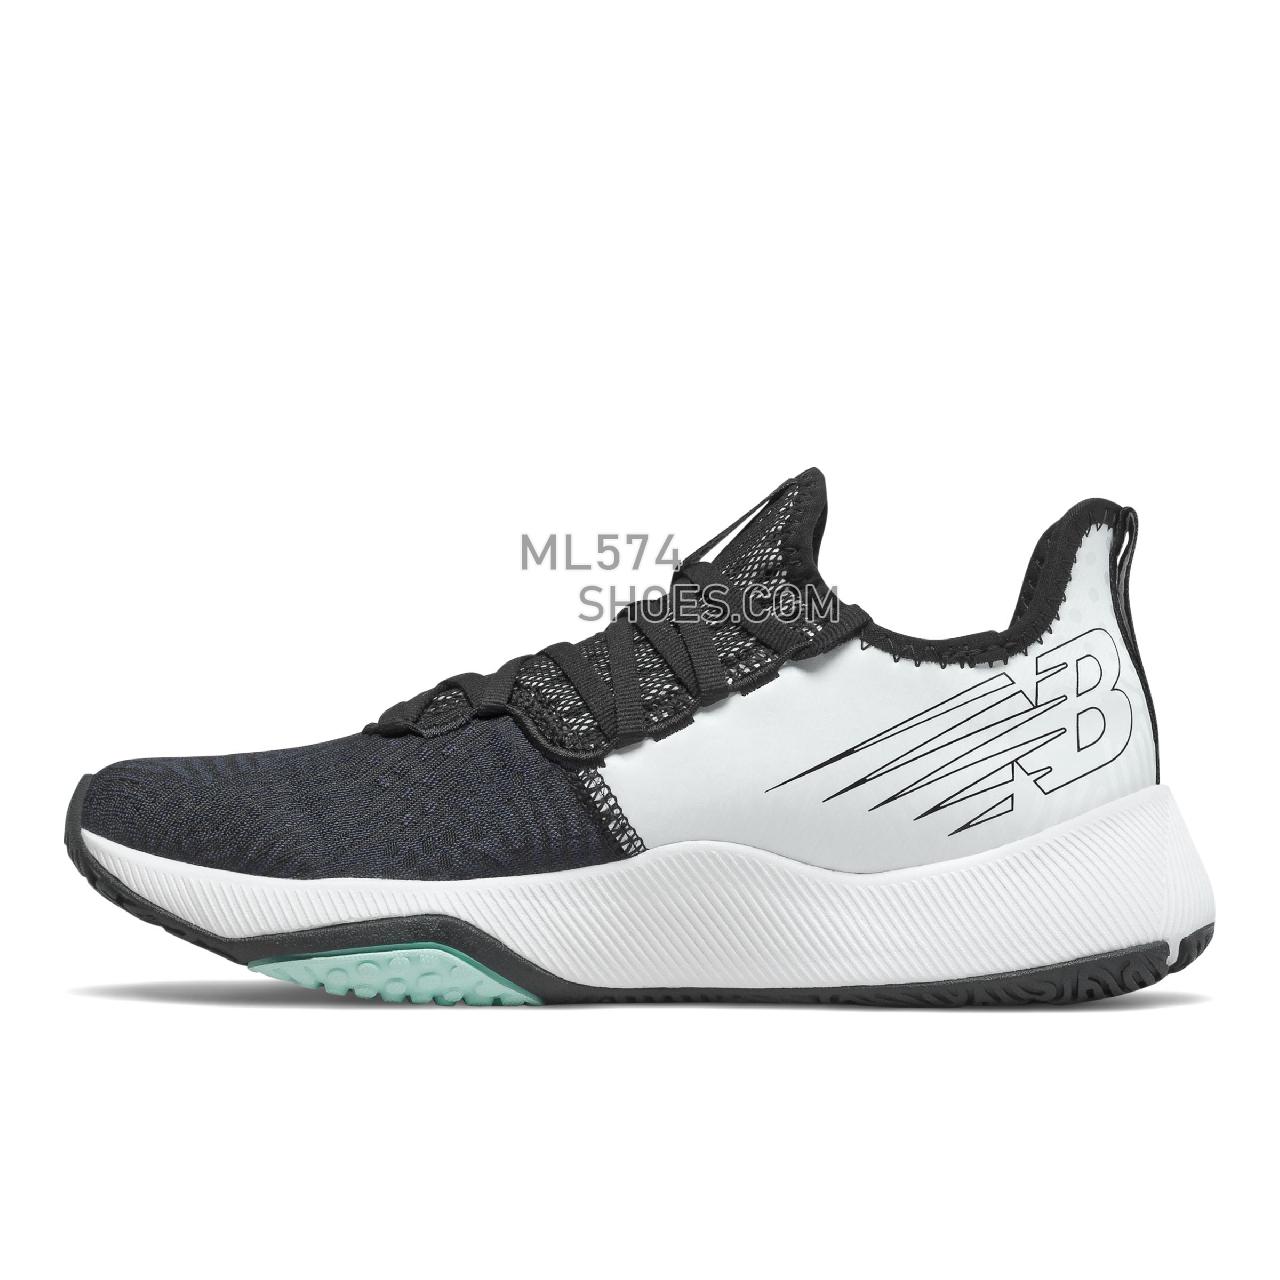 New Balance FuelCell 100 - Women's Workout - Black with Outerspace and White Mint - WXM100LK